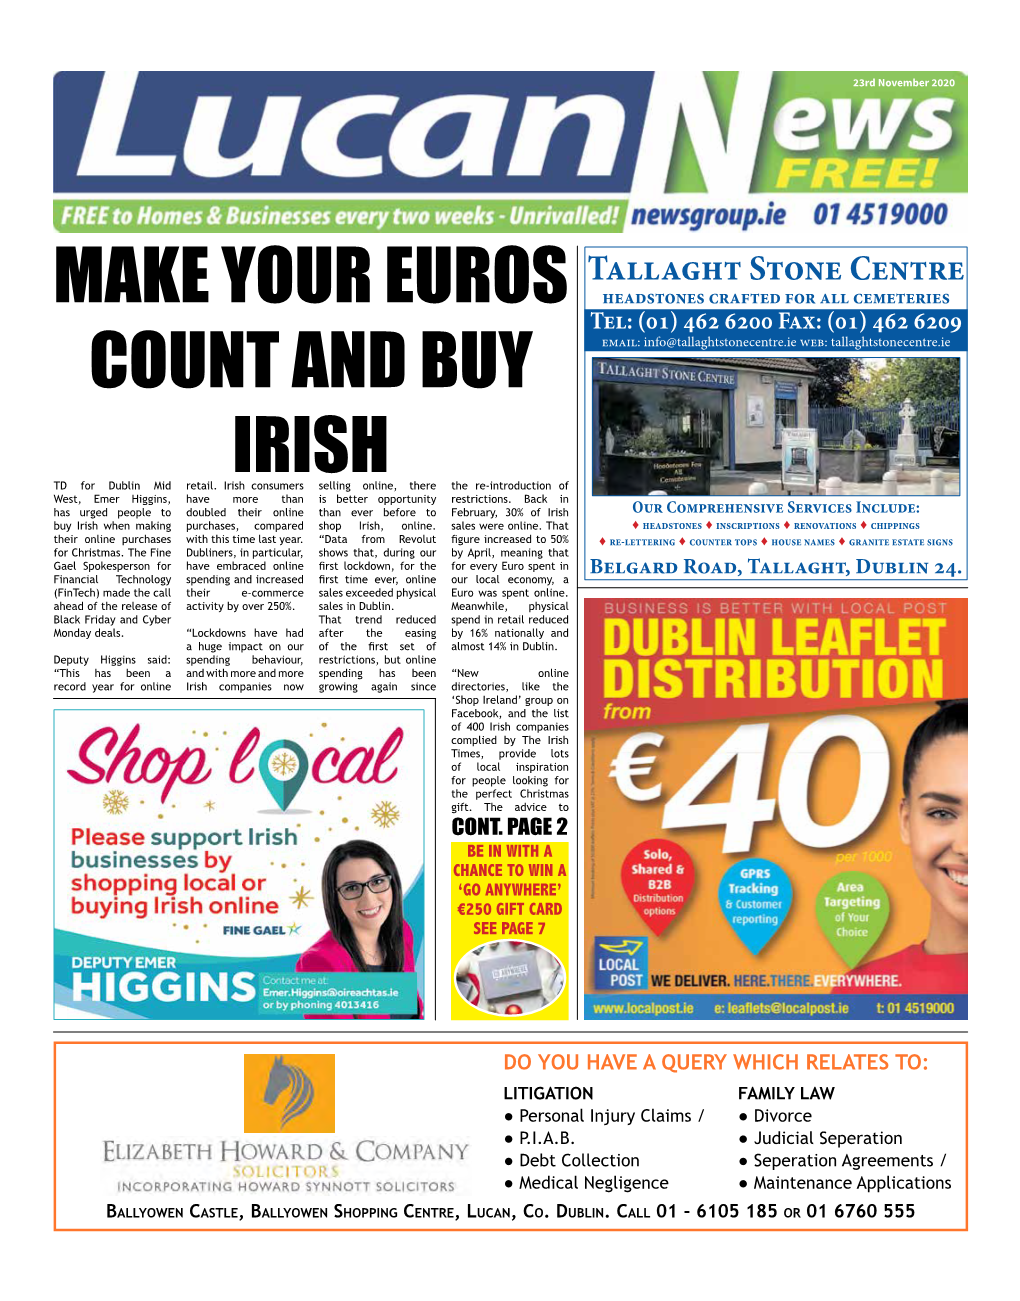 Make Your Euros Count and Buy Irish